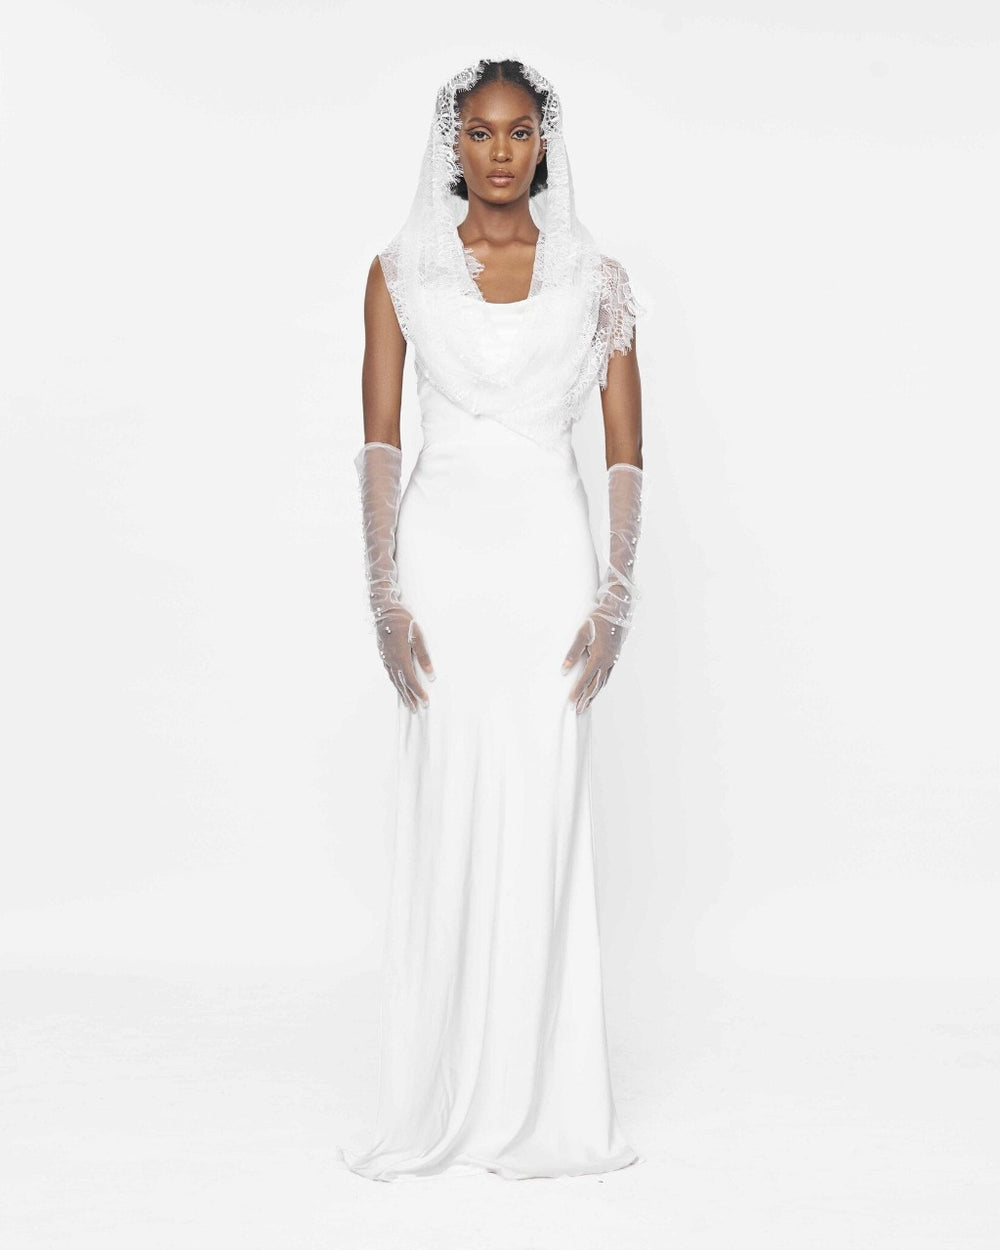 A model wearing a White slip dress and a lace veil over her head